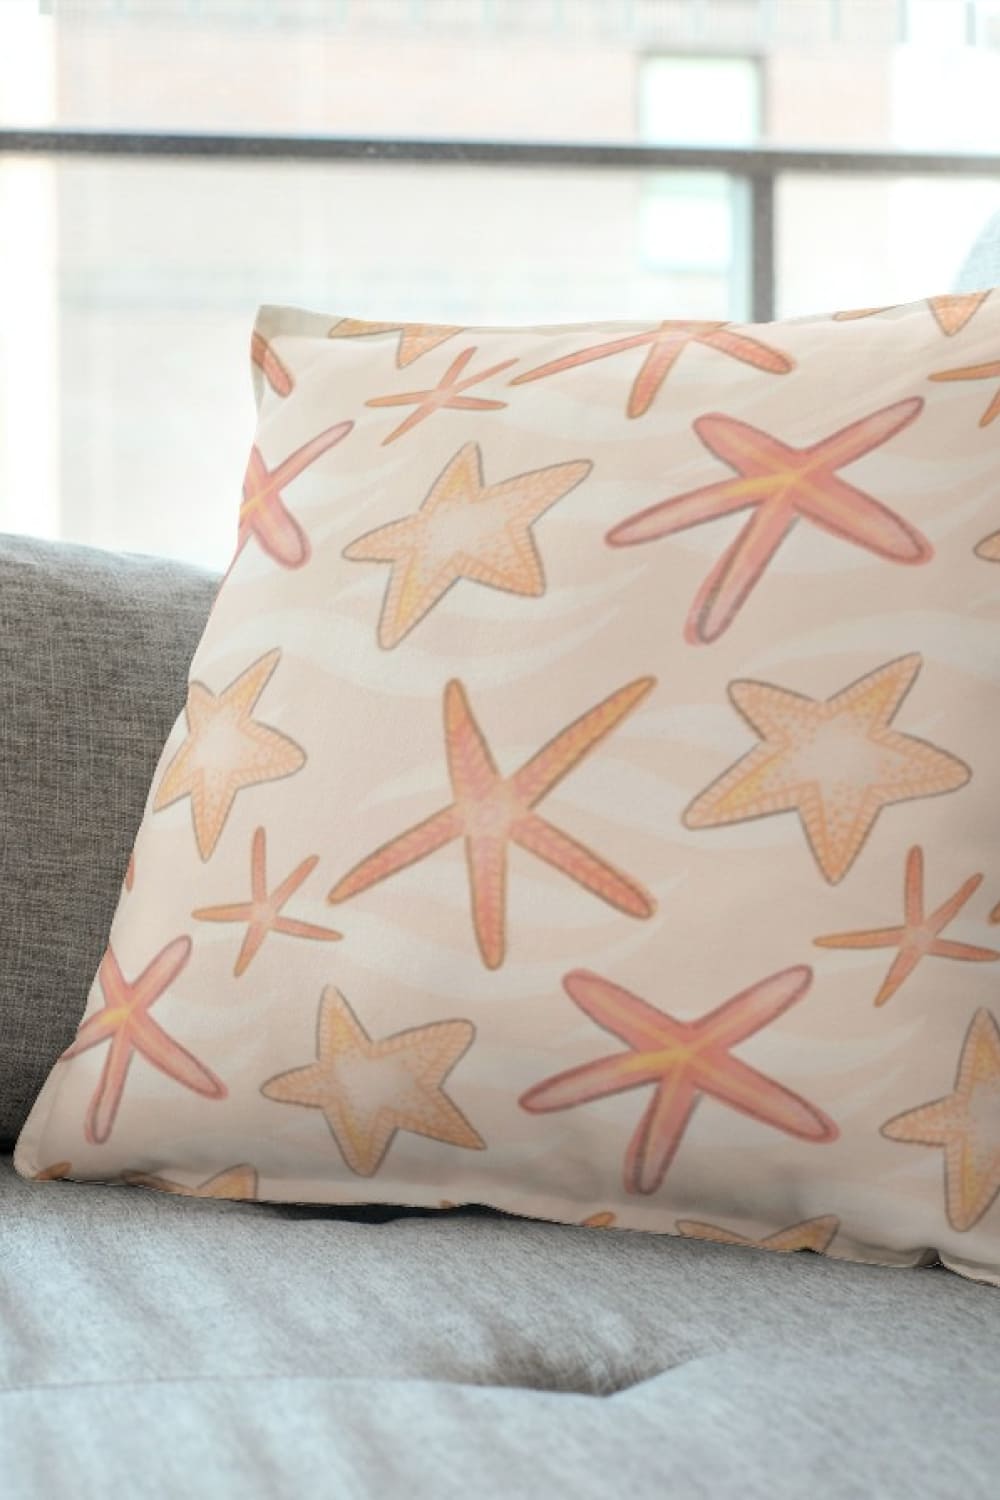 Pillow with cute corals in pastel colors.